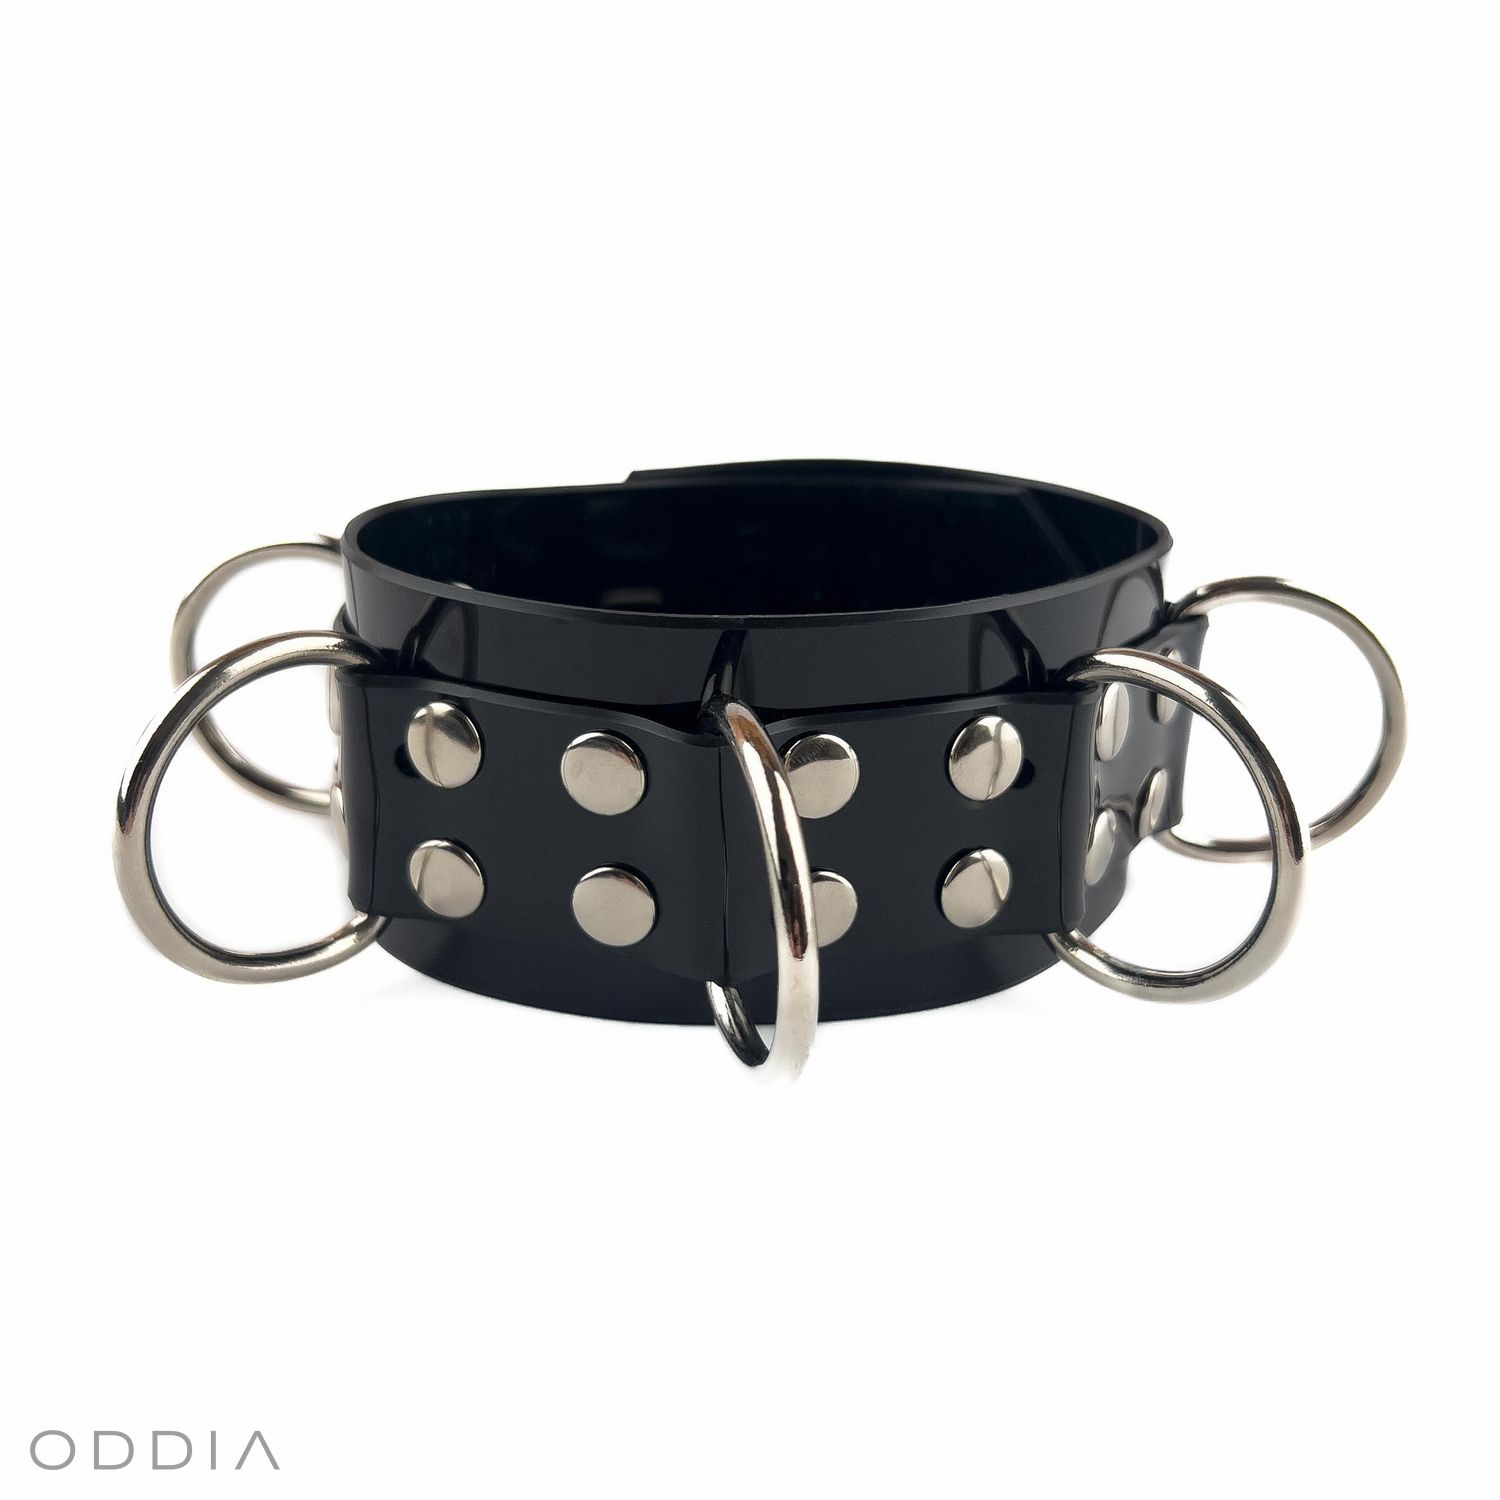 5 cm wide black BDSM collar with rings around its circumference